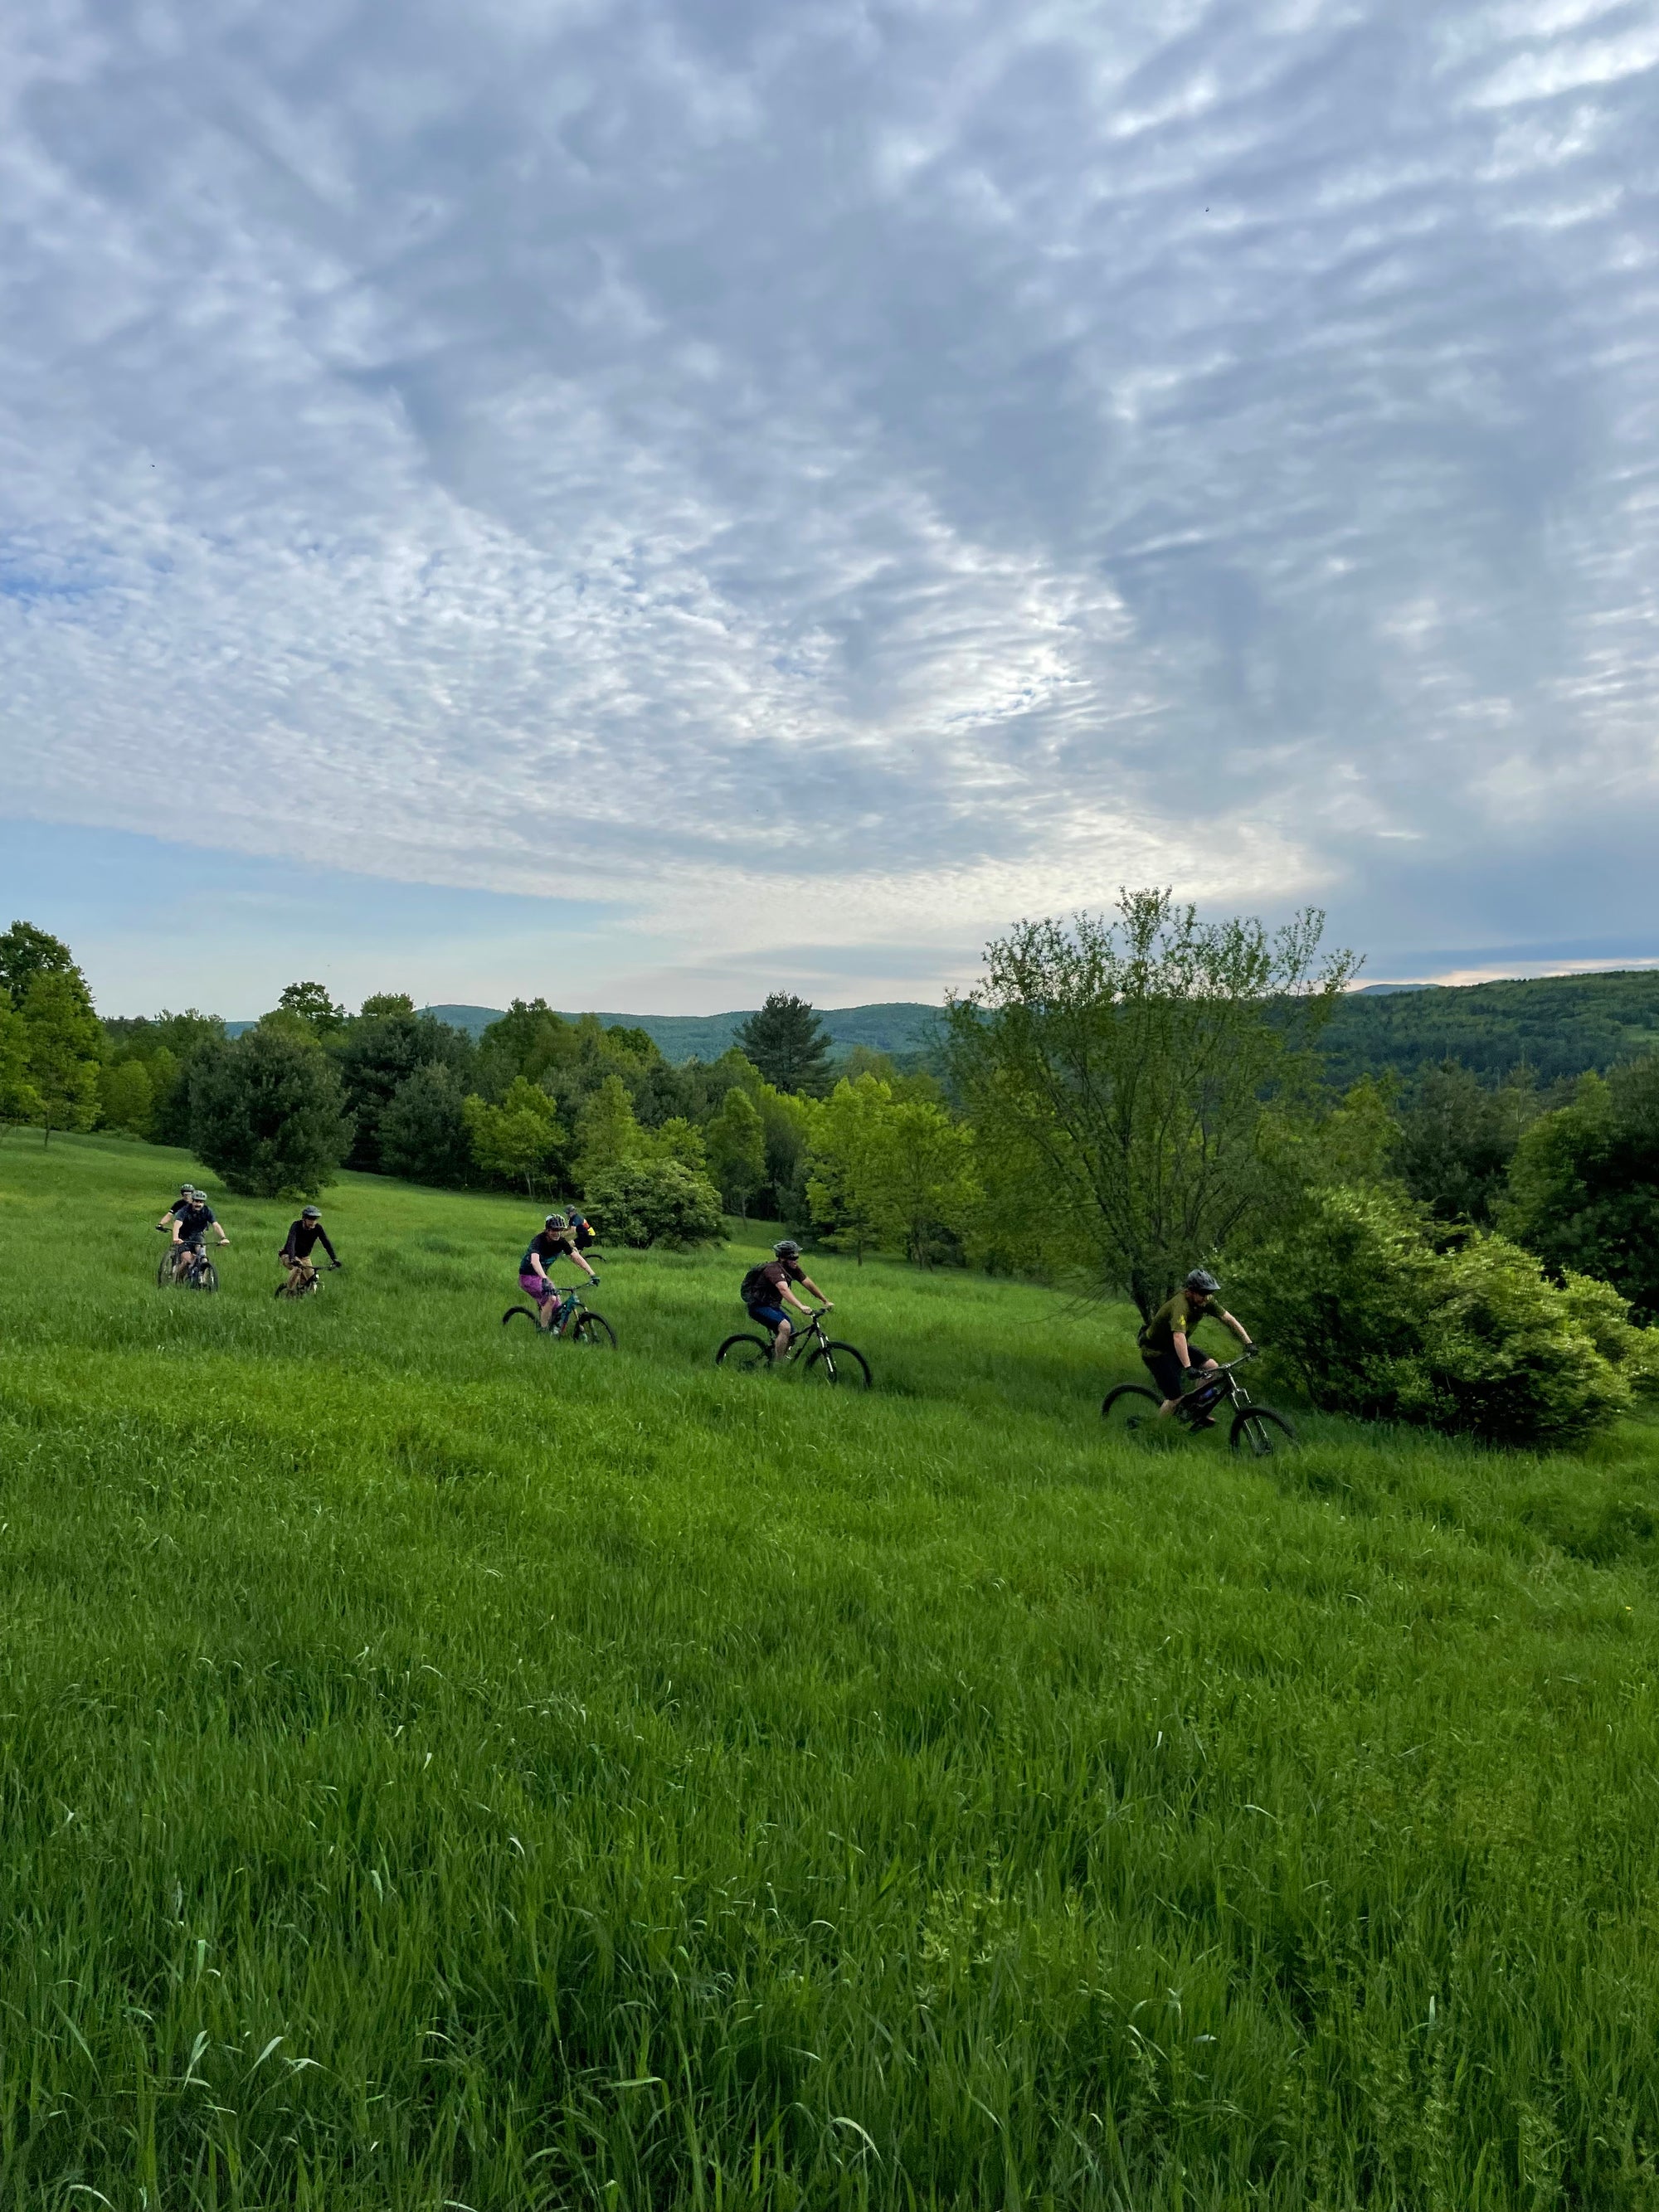 five mountain bikers in the distance, riding in a green field